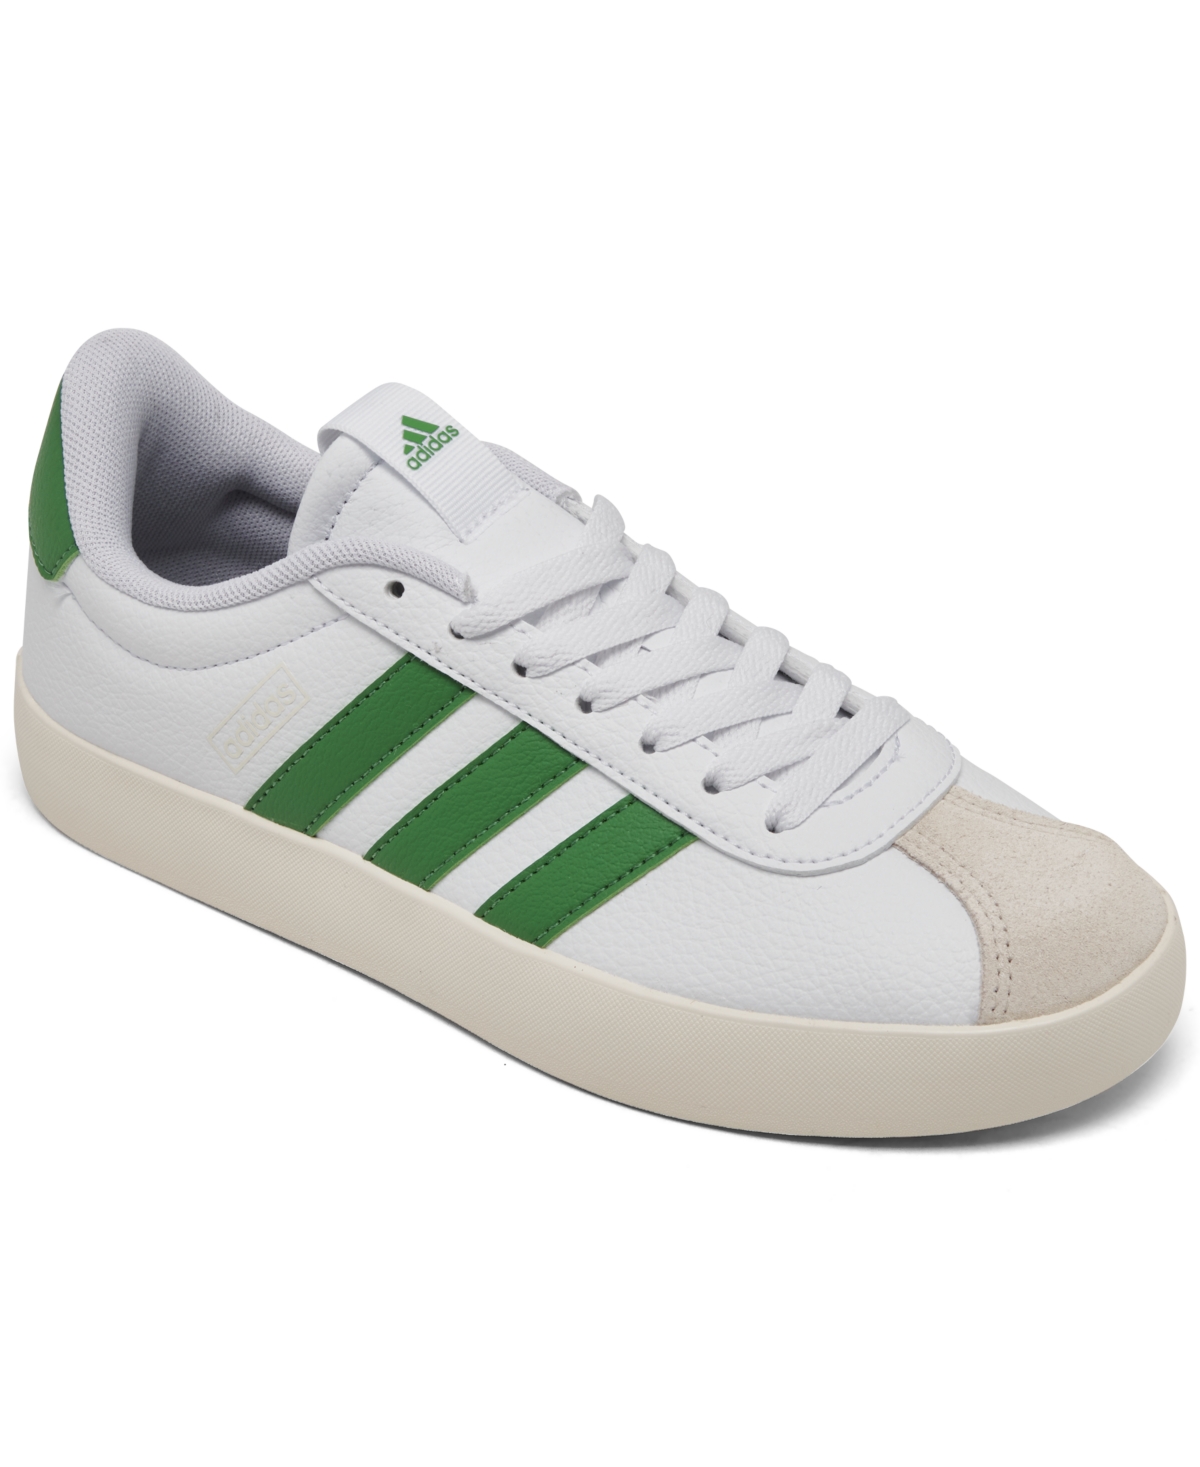 Women's Vl Court 3.0 Casual Sneakers from Finish Line - White, Preloved Green, Alum